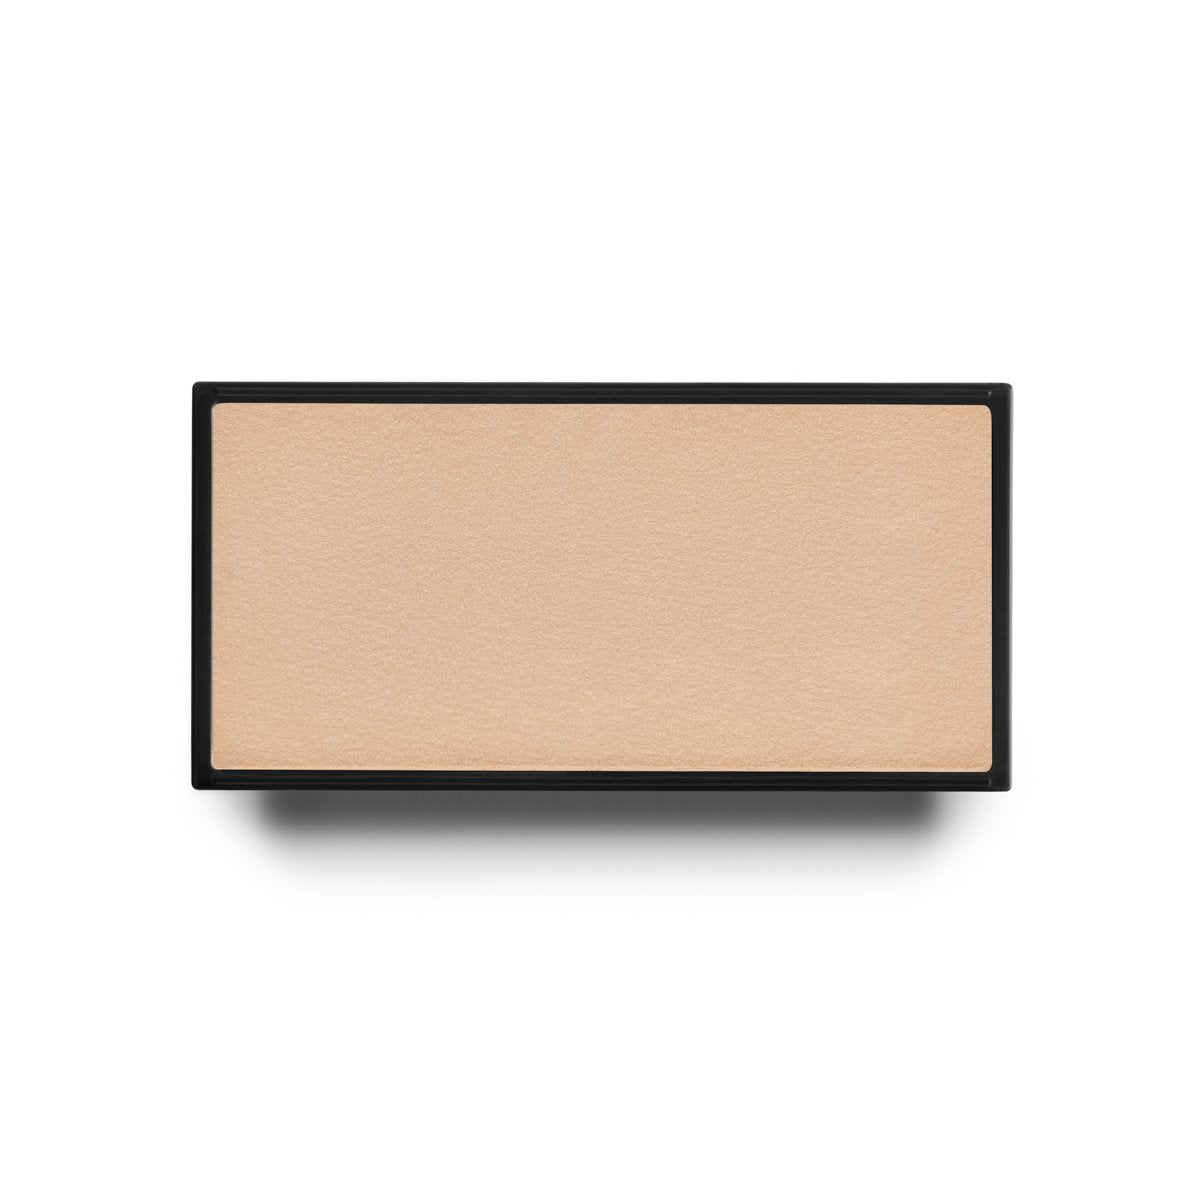 LIGHT MATTER - TAUPE CREAM EYESHADOW - peachy-taupe cream shadow that also functions as a shadow base